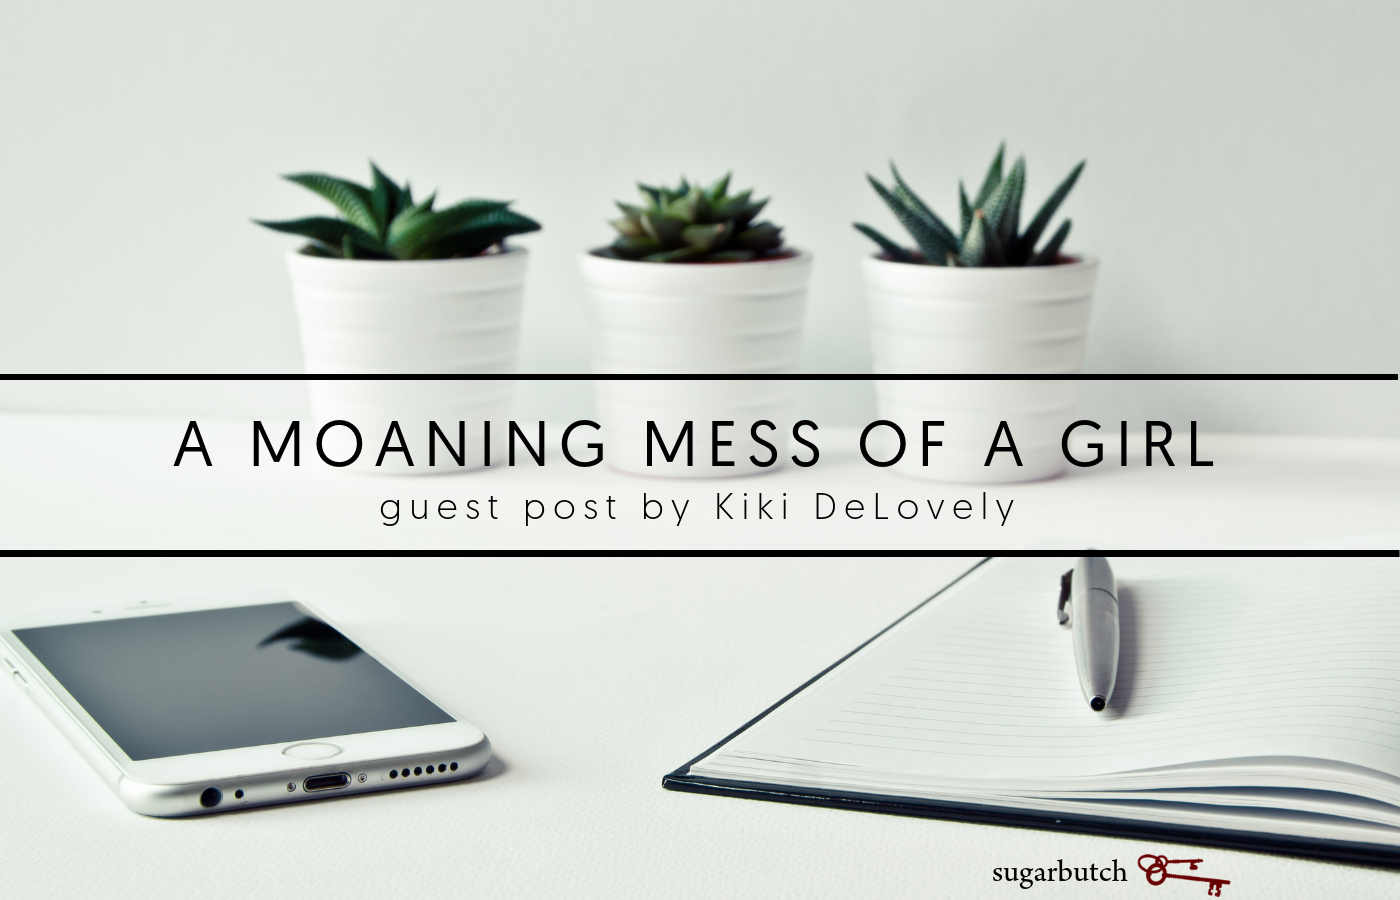 A Moaning Mess of a Girl, Guest Post by Kiki DeLovely